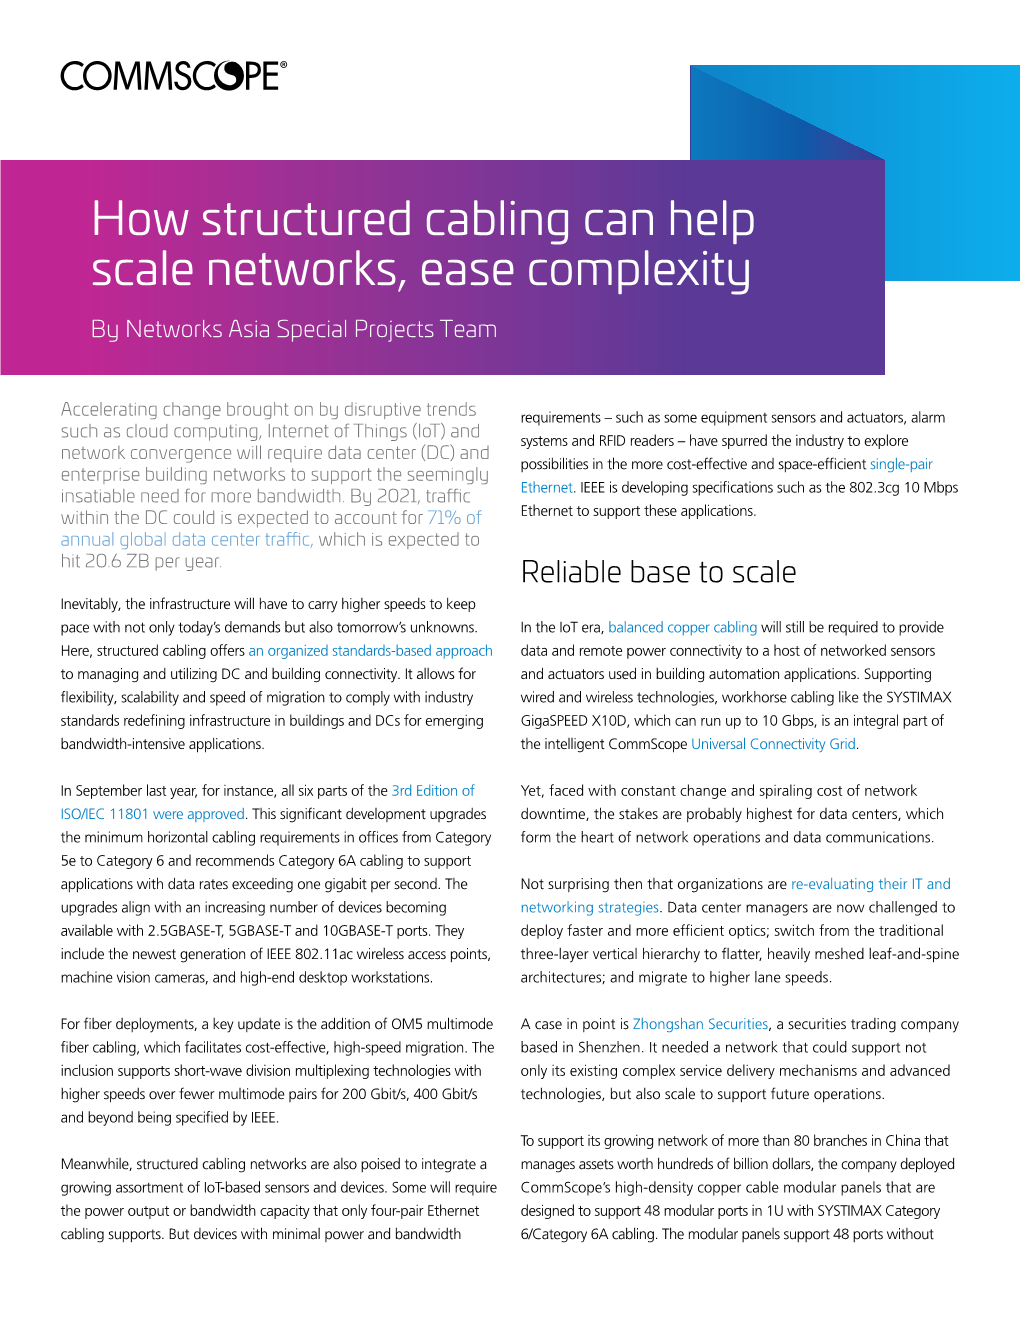 How Structured Cabling Can Help Scale Networks, Ease Complexity by Networks Asia Special Projects Team